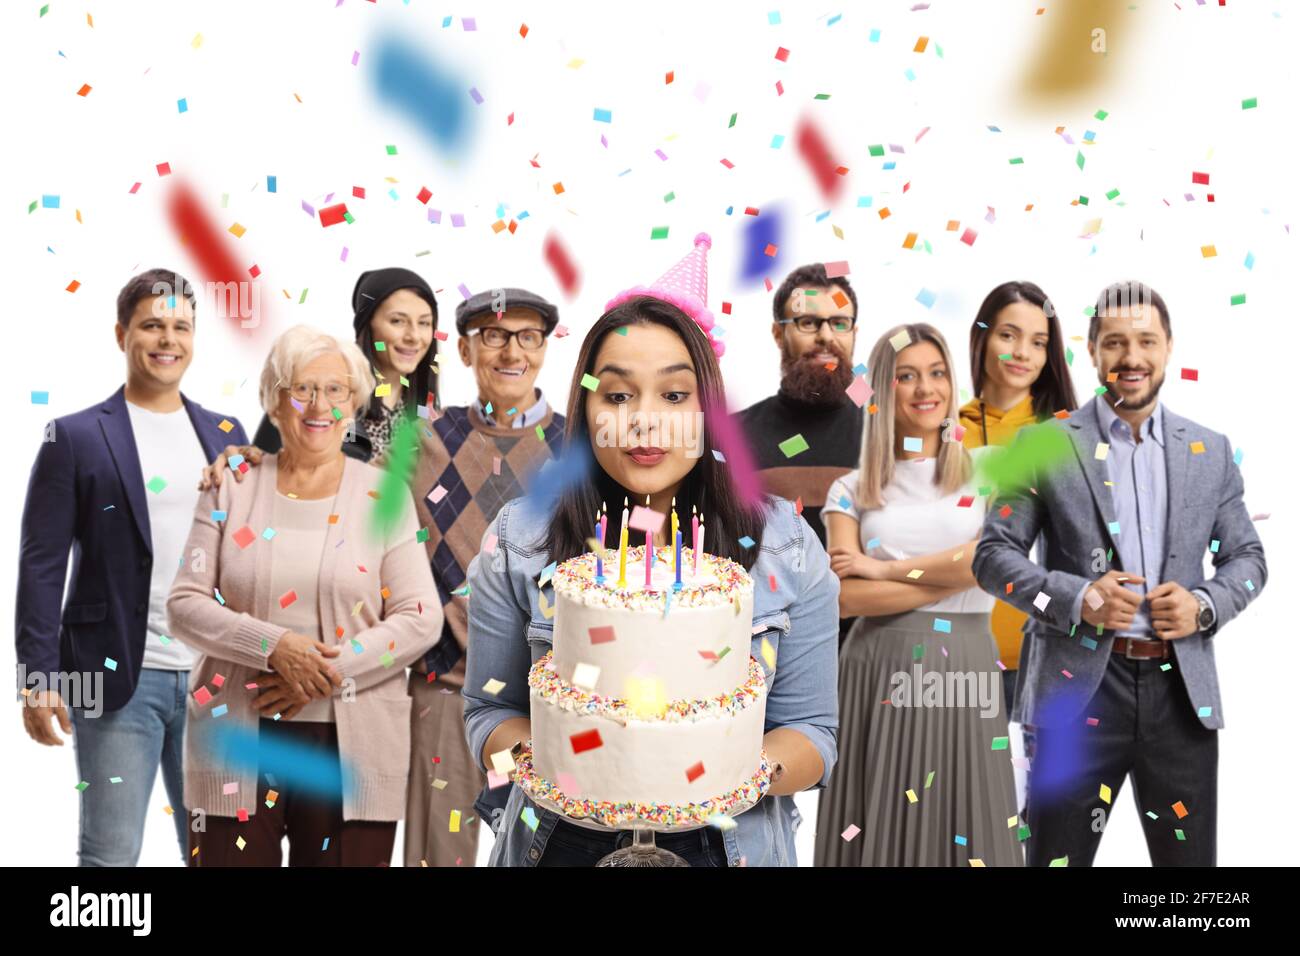 Young woman celebrating birthday and blowing candles on a cake with her family isolated on white background Stock Photo